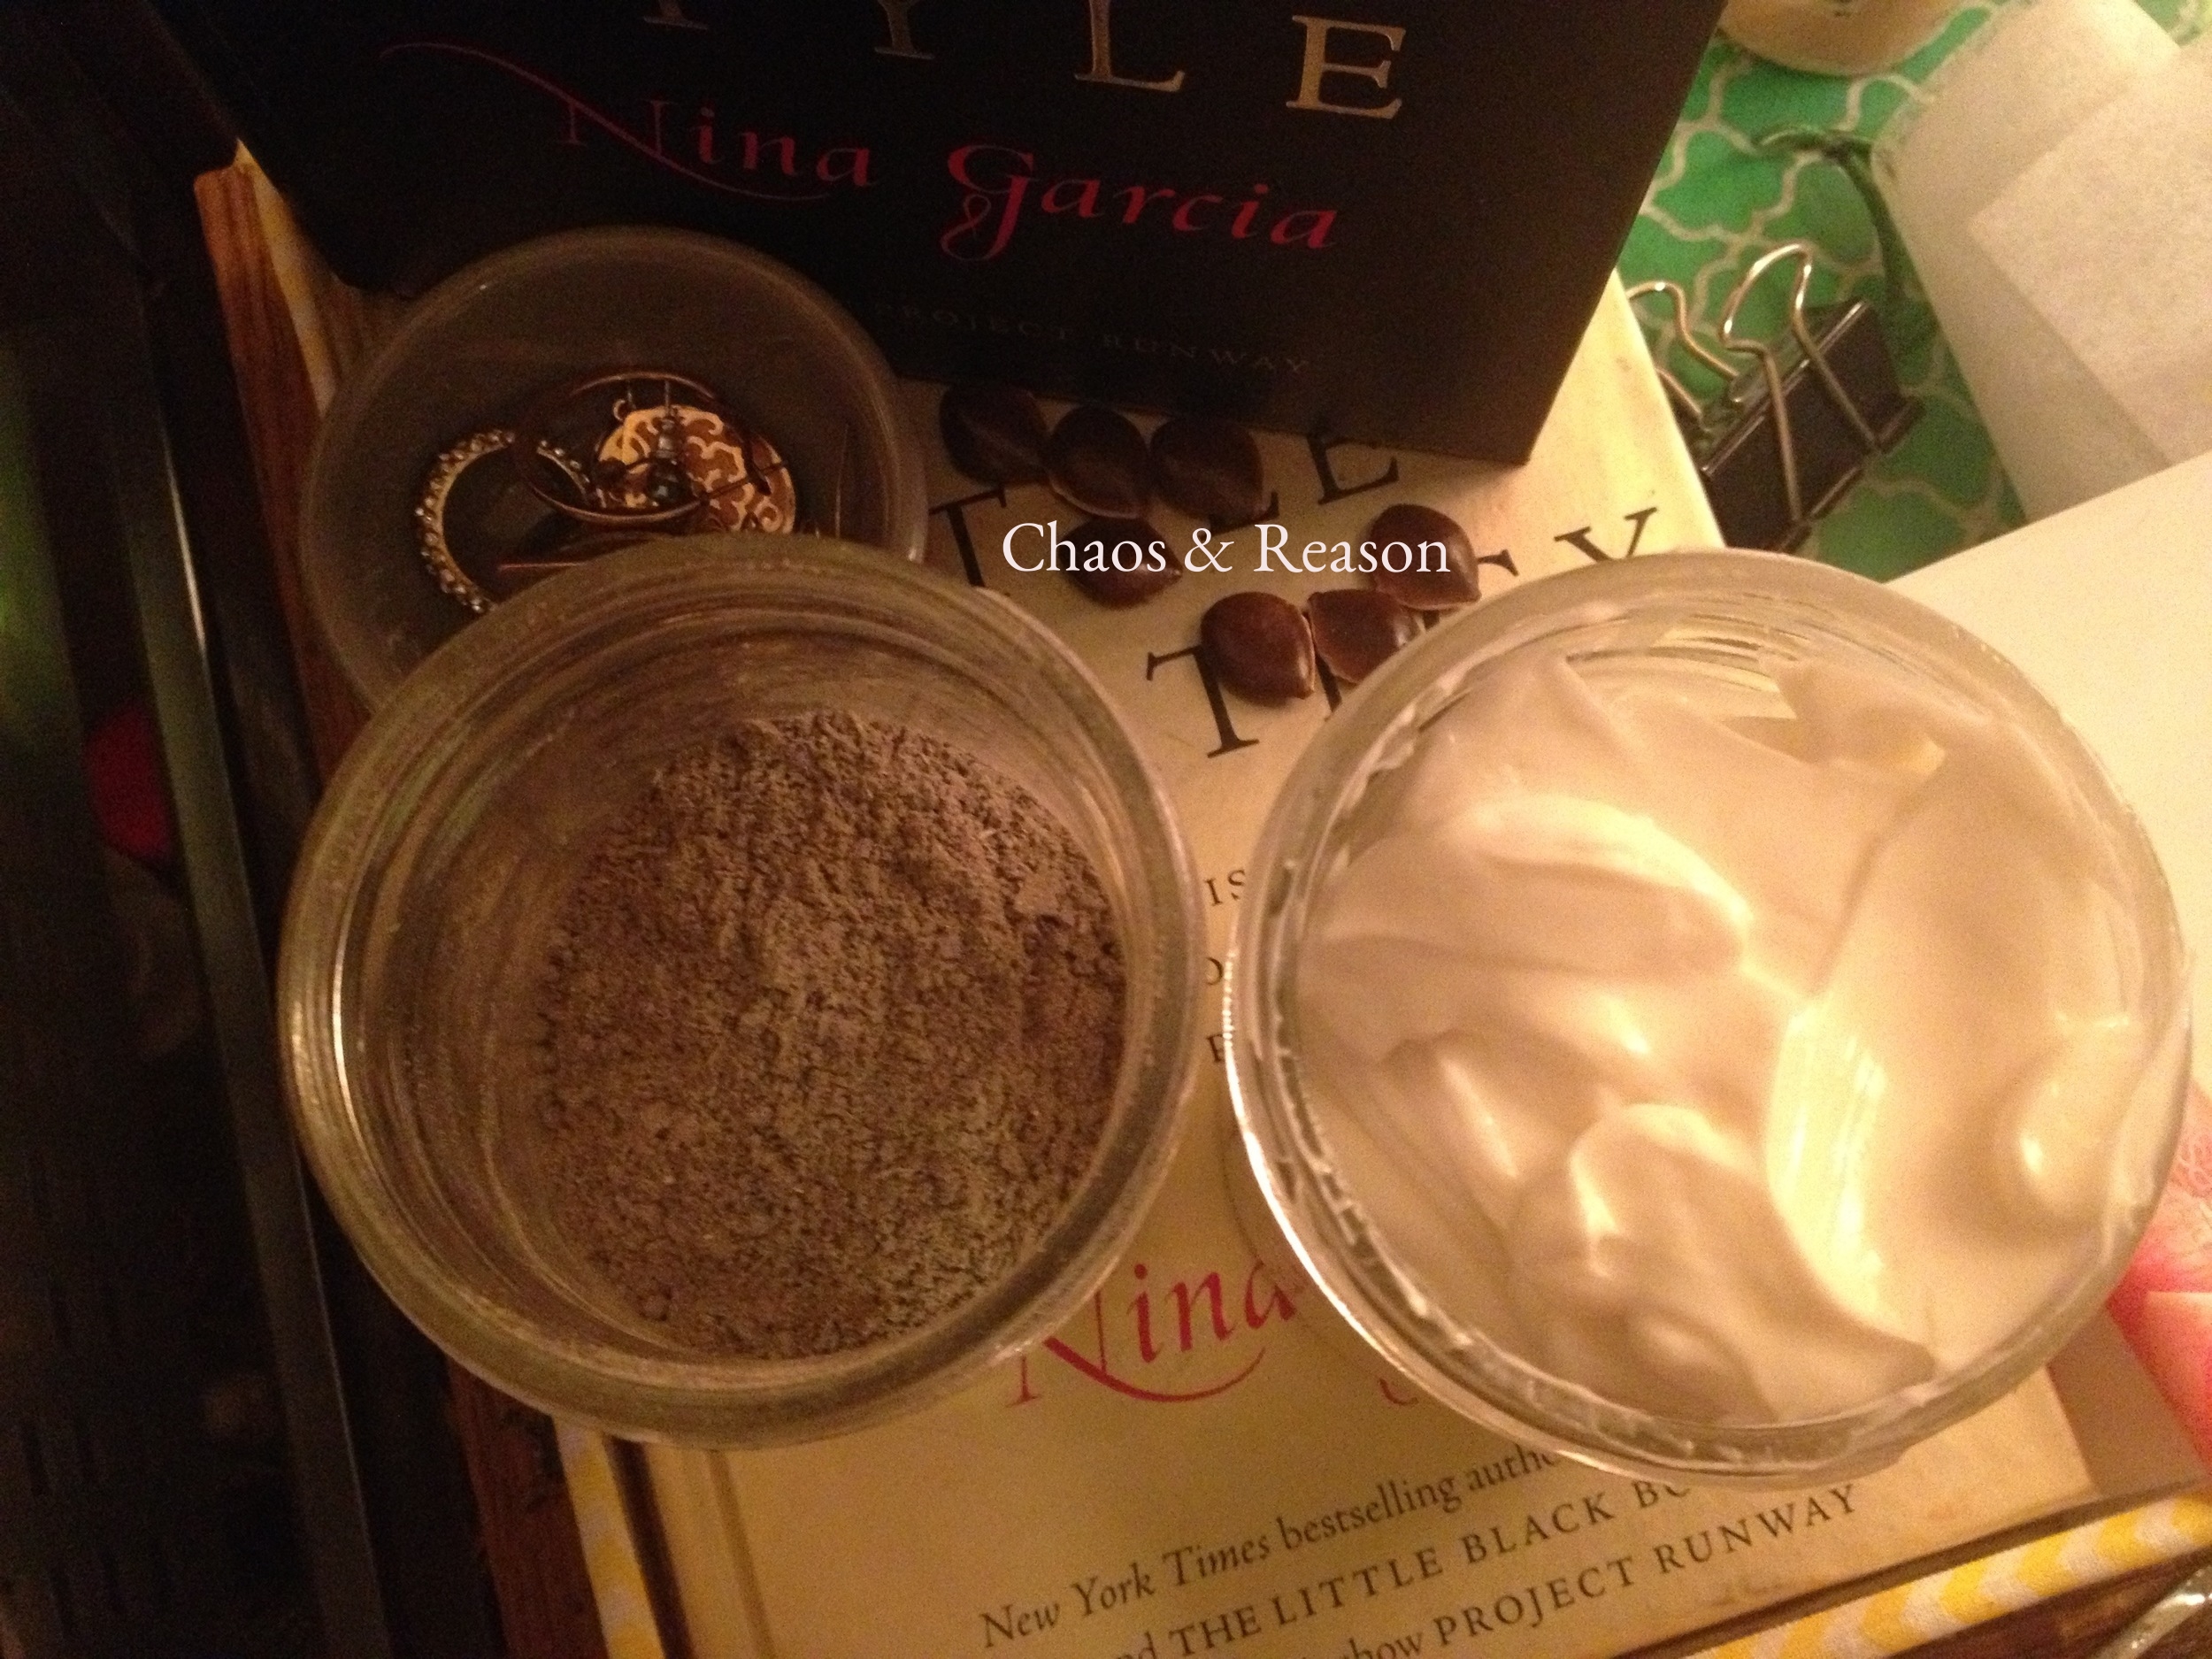 Facial Grains and Cleansing Milk